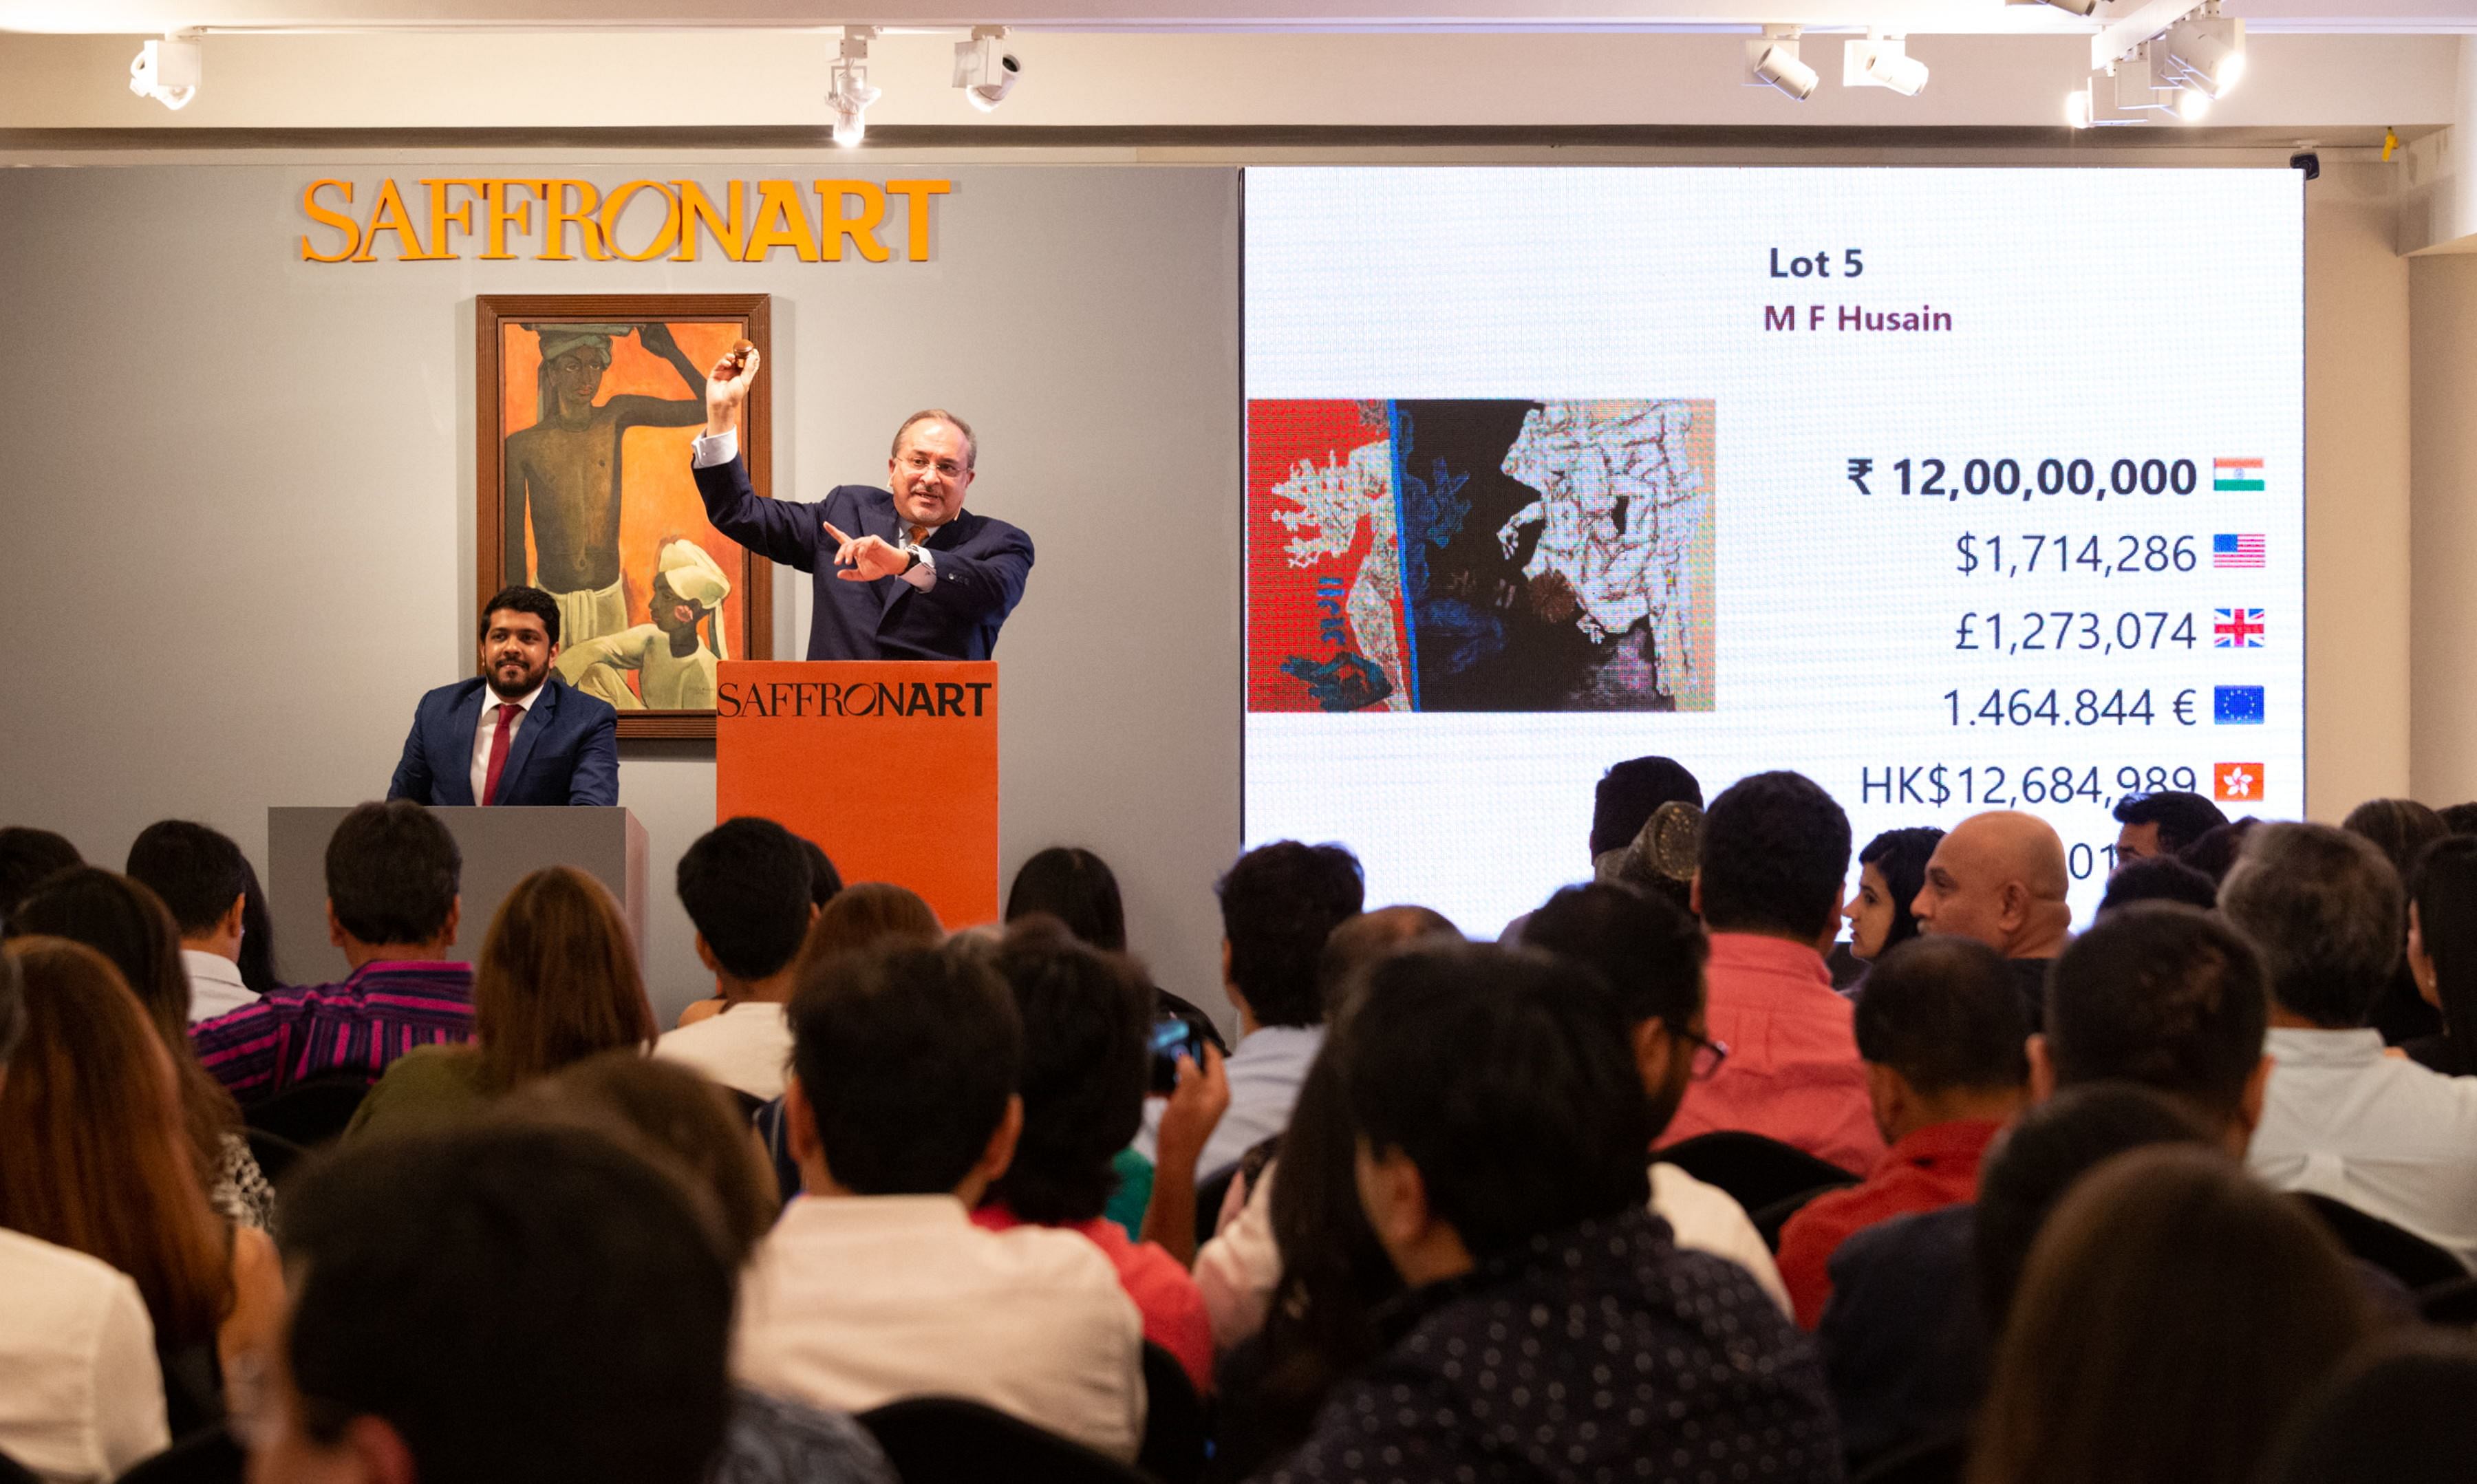 Saffronart officials conduct an auction on behalf of Enforcement Directorate, in Mumbai, on Thursday, March 5, 2020. (Credit: PTI)